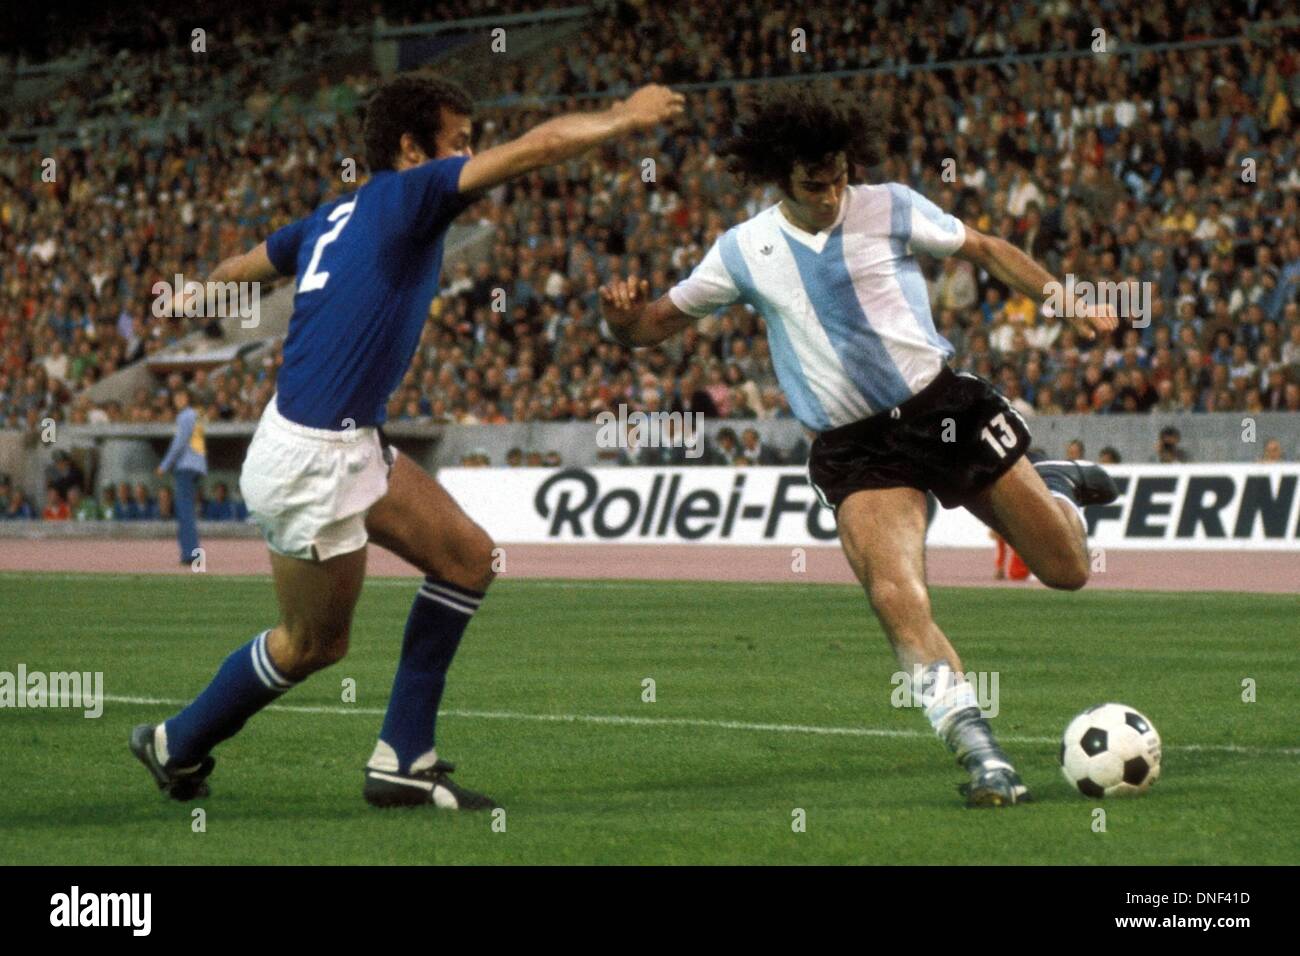 Argentina's Mario Kempes recalls the moment he led his nation to